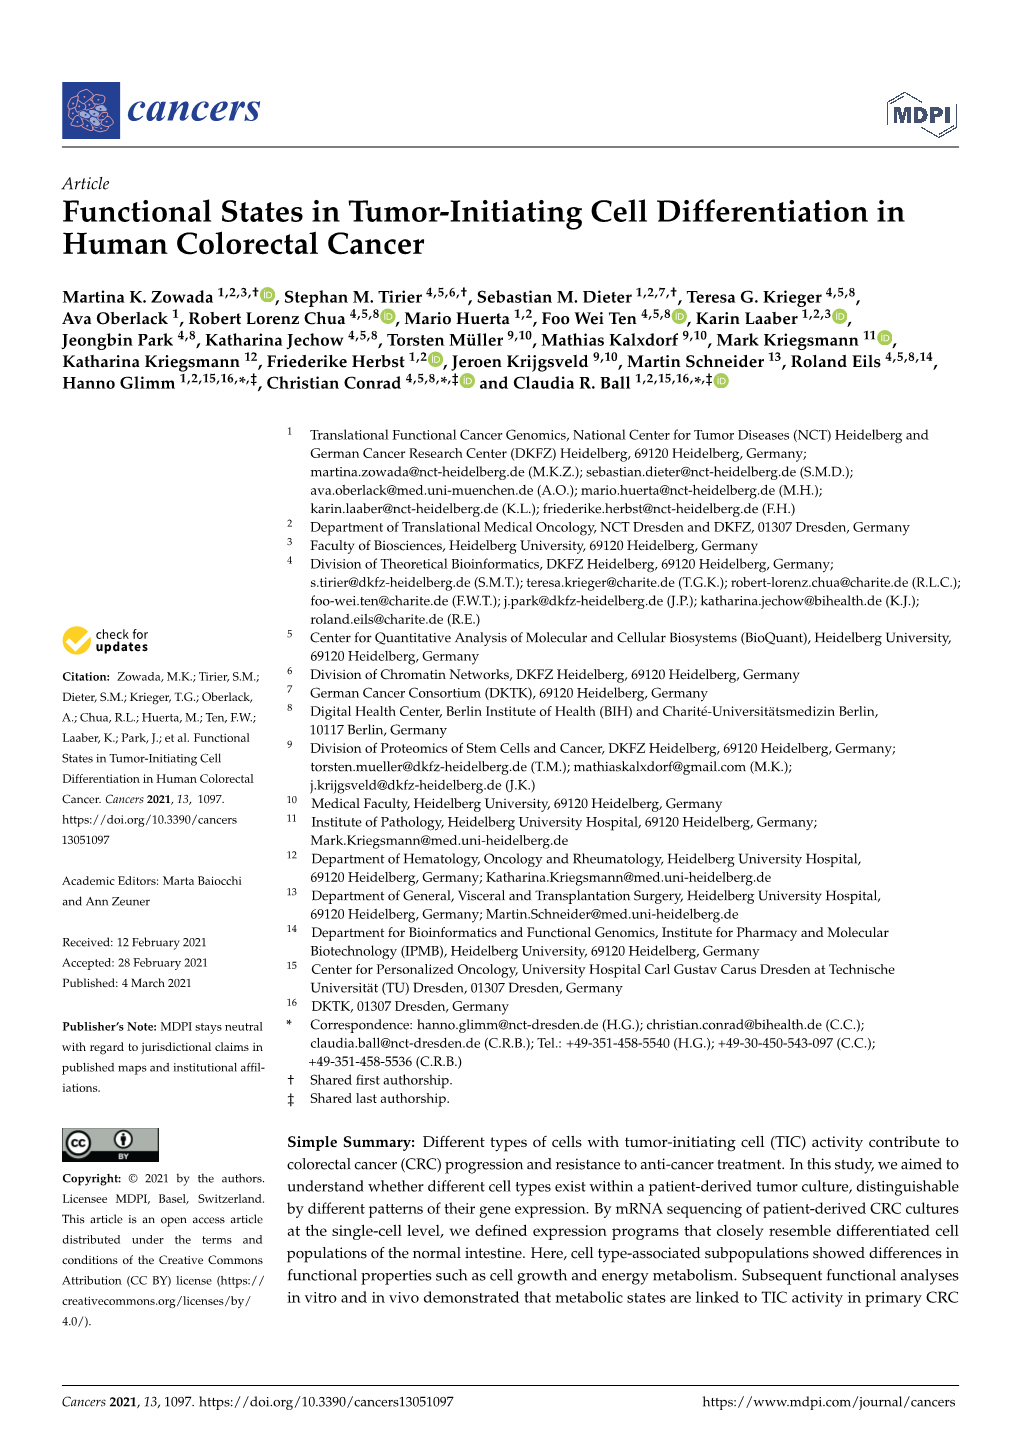 Functional States in Tumor-Initiating Cell Differentiation in Human Colorectal Cancer